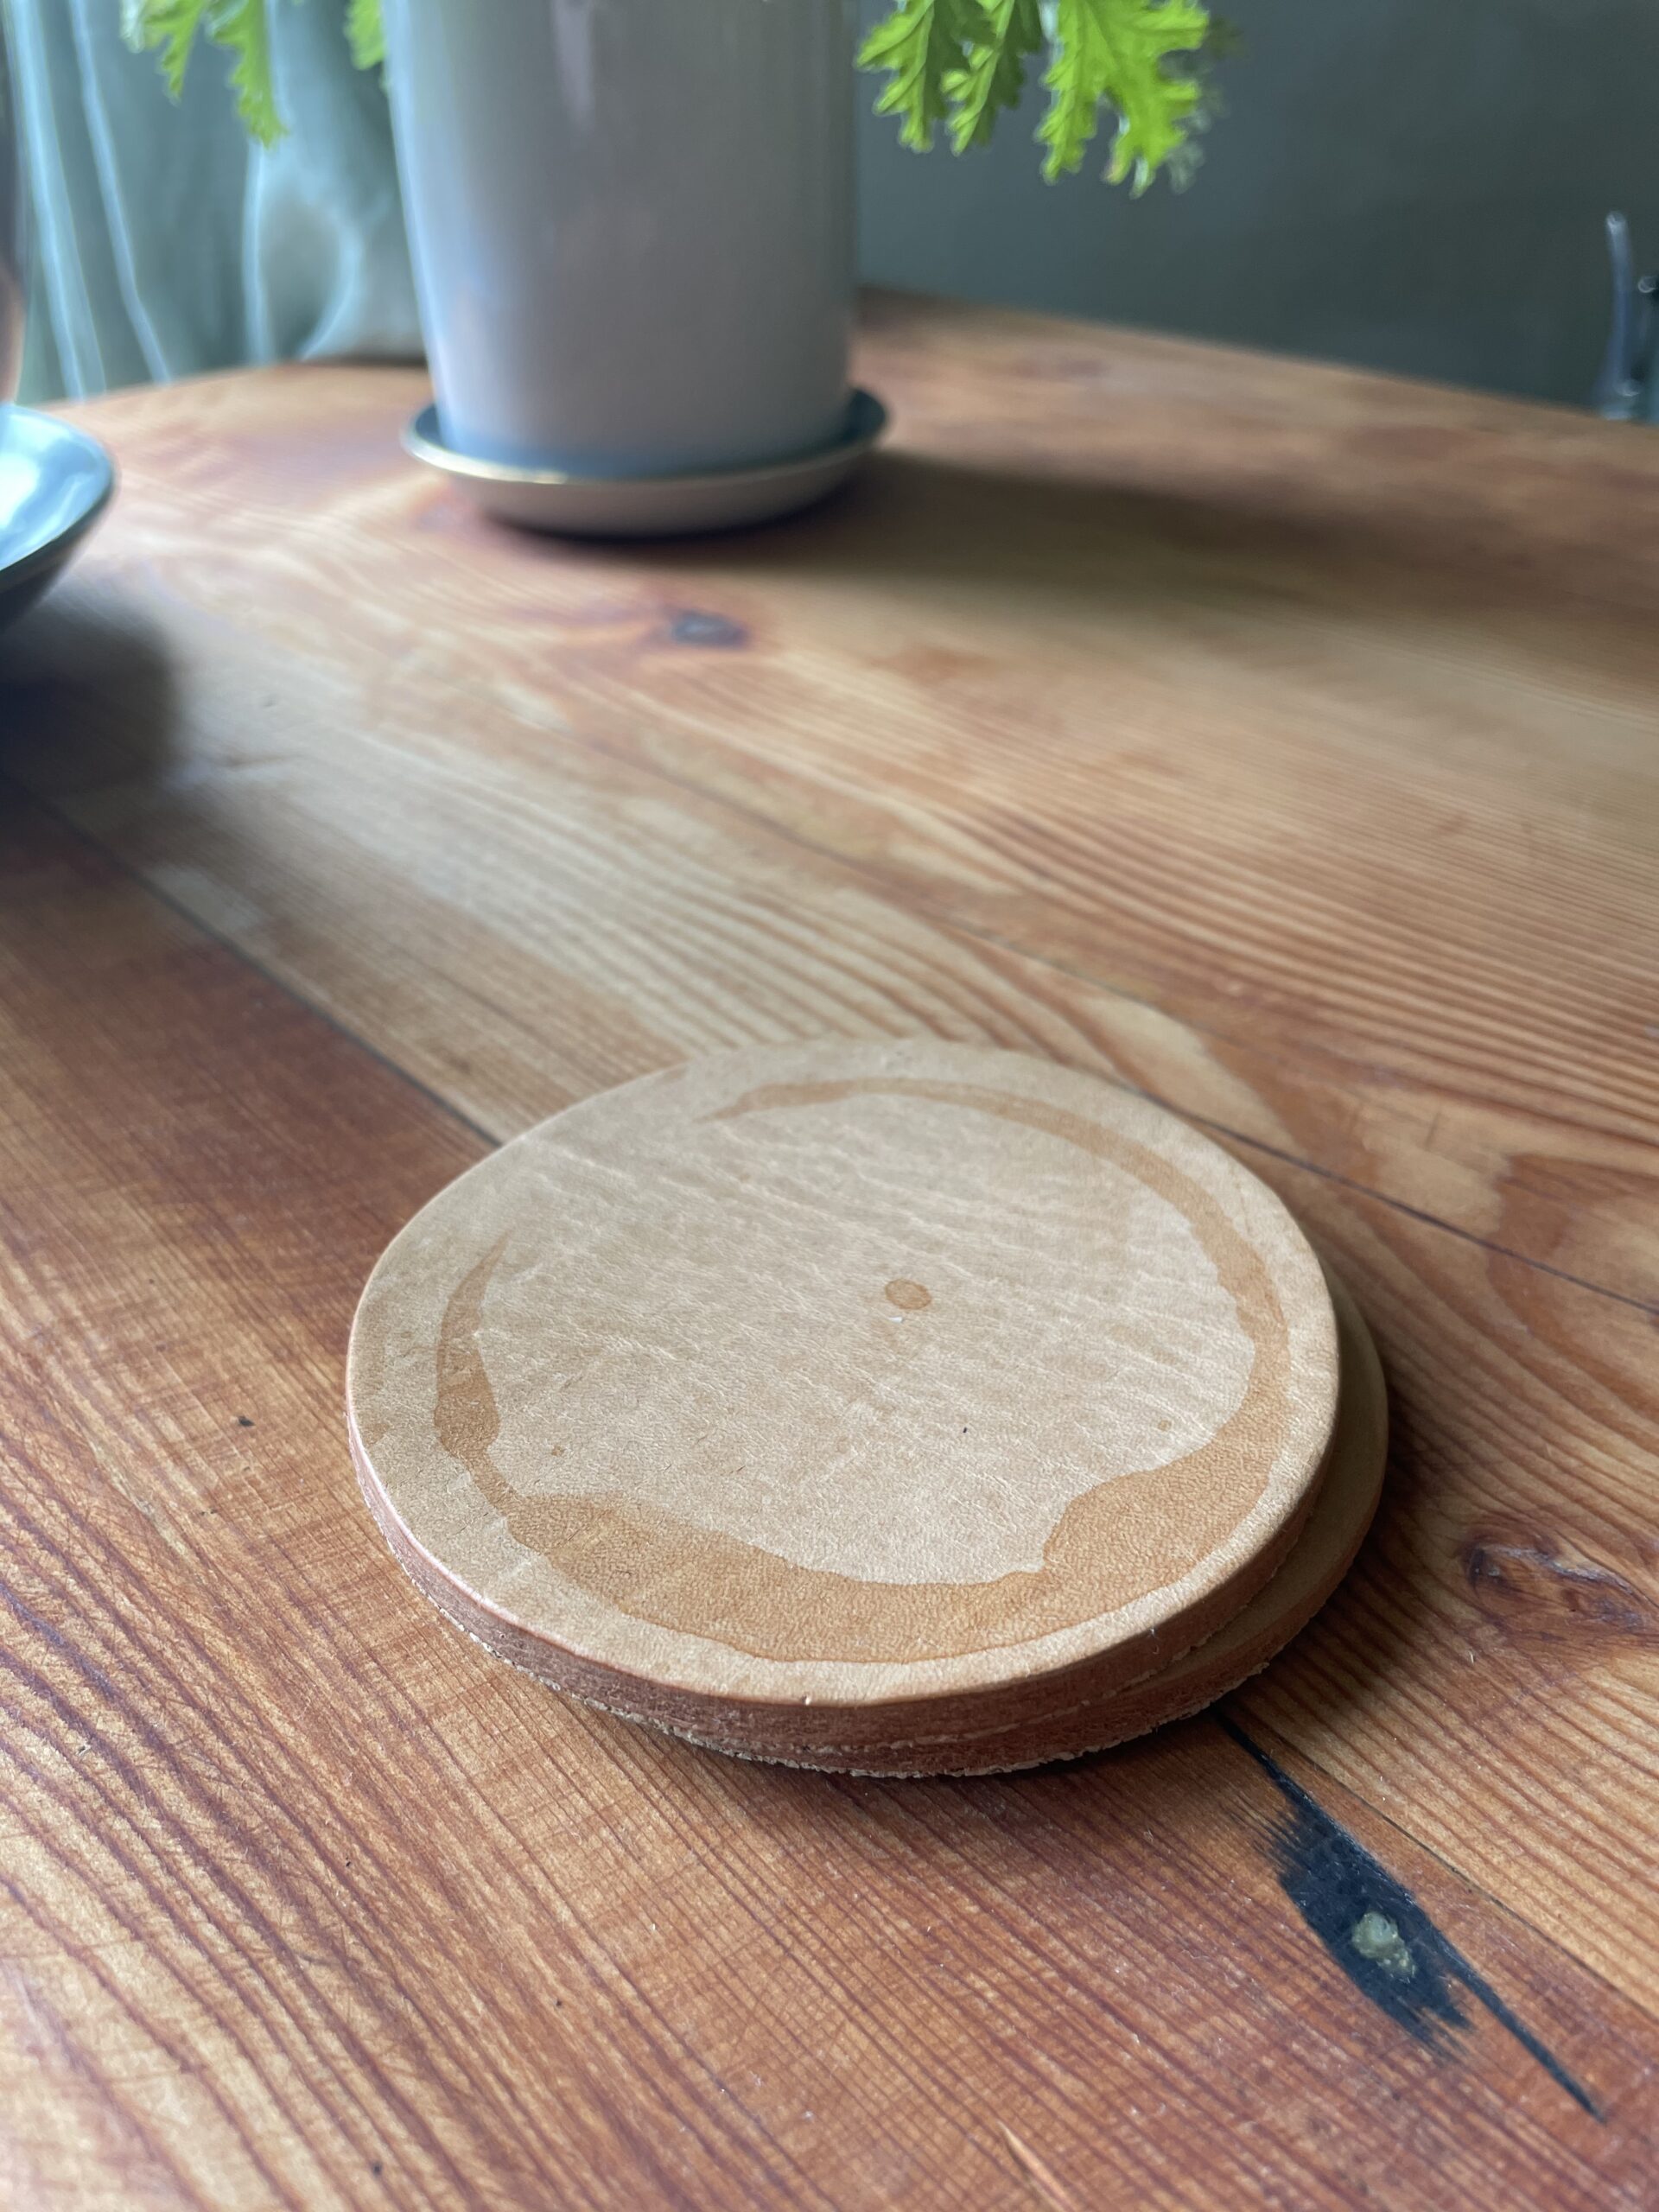 A leather undyed coaster